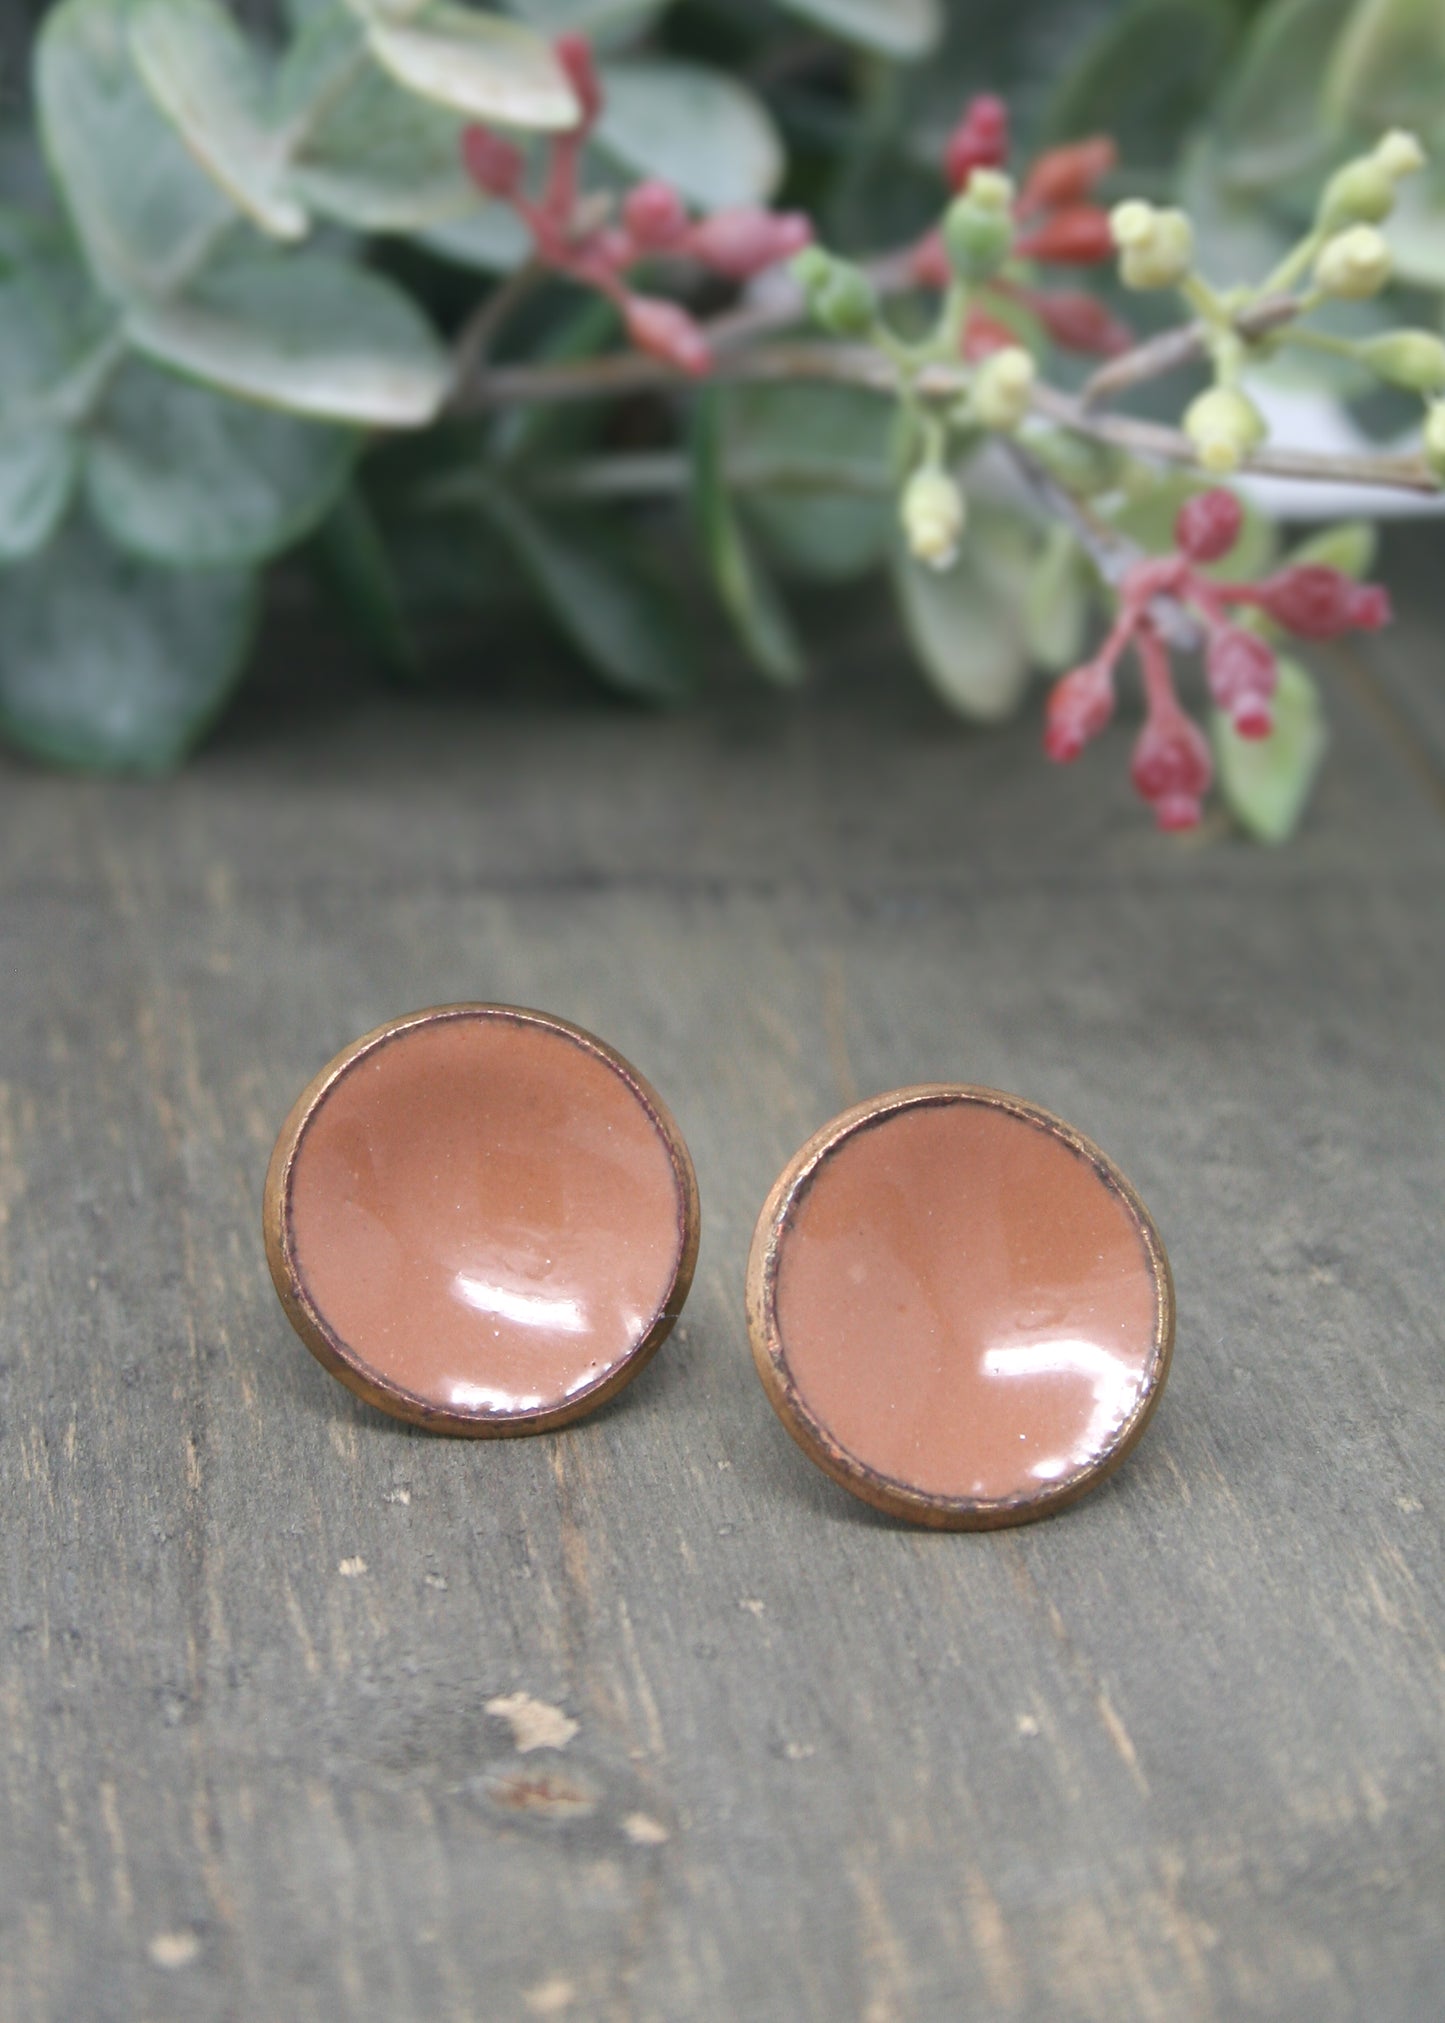 a pair of brown earrings sitting on top of a wooden table